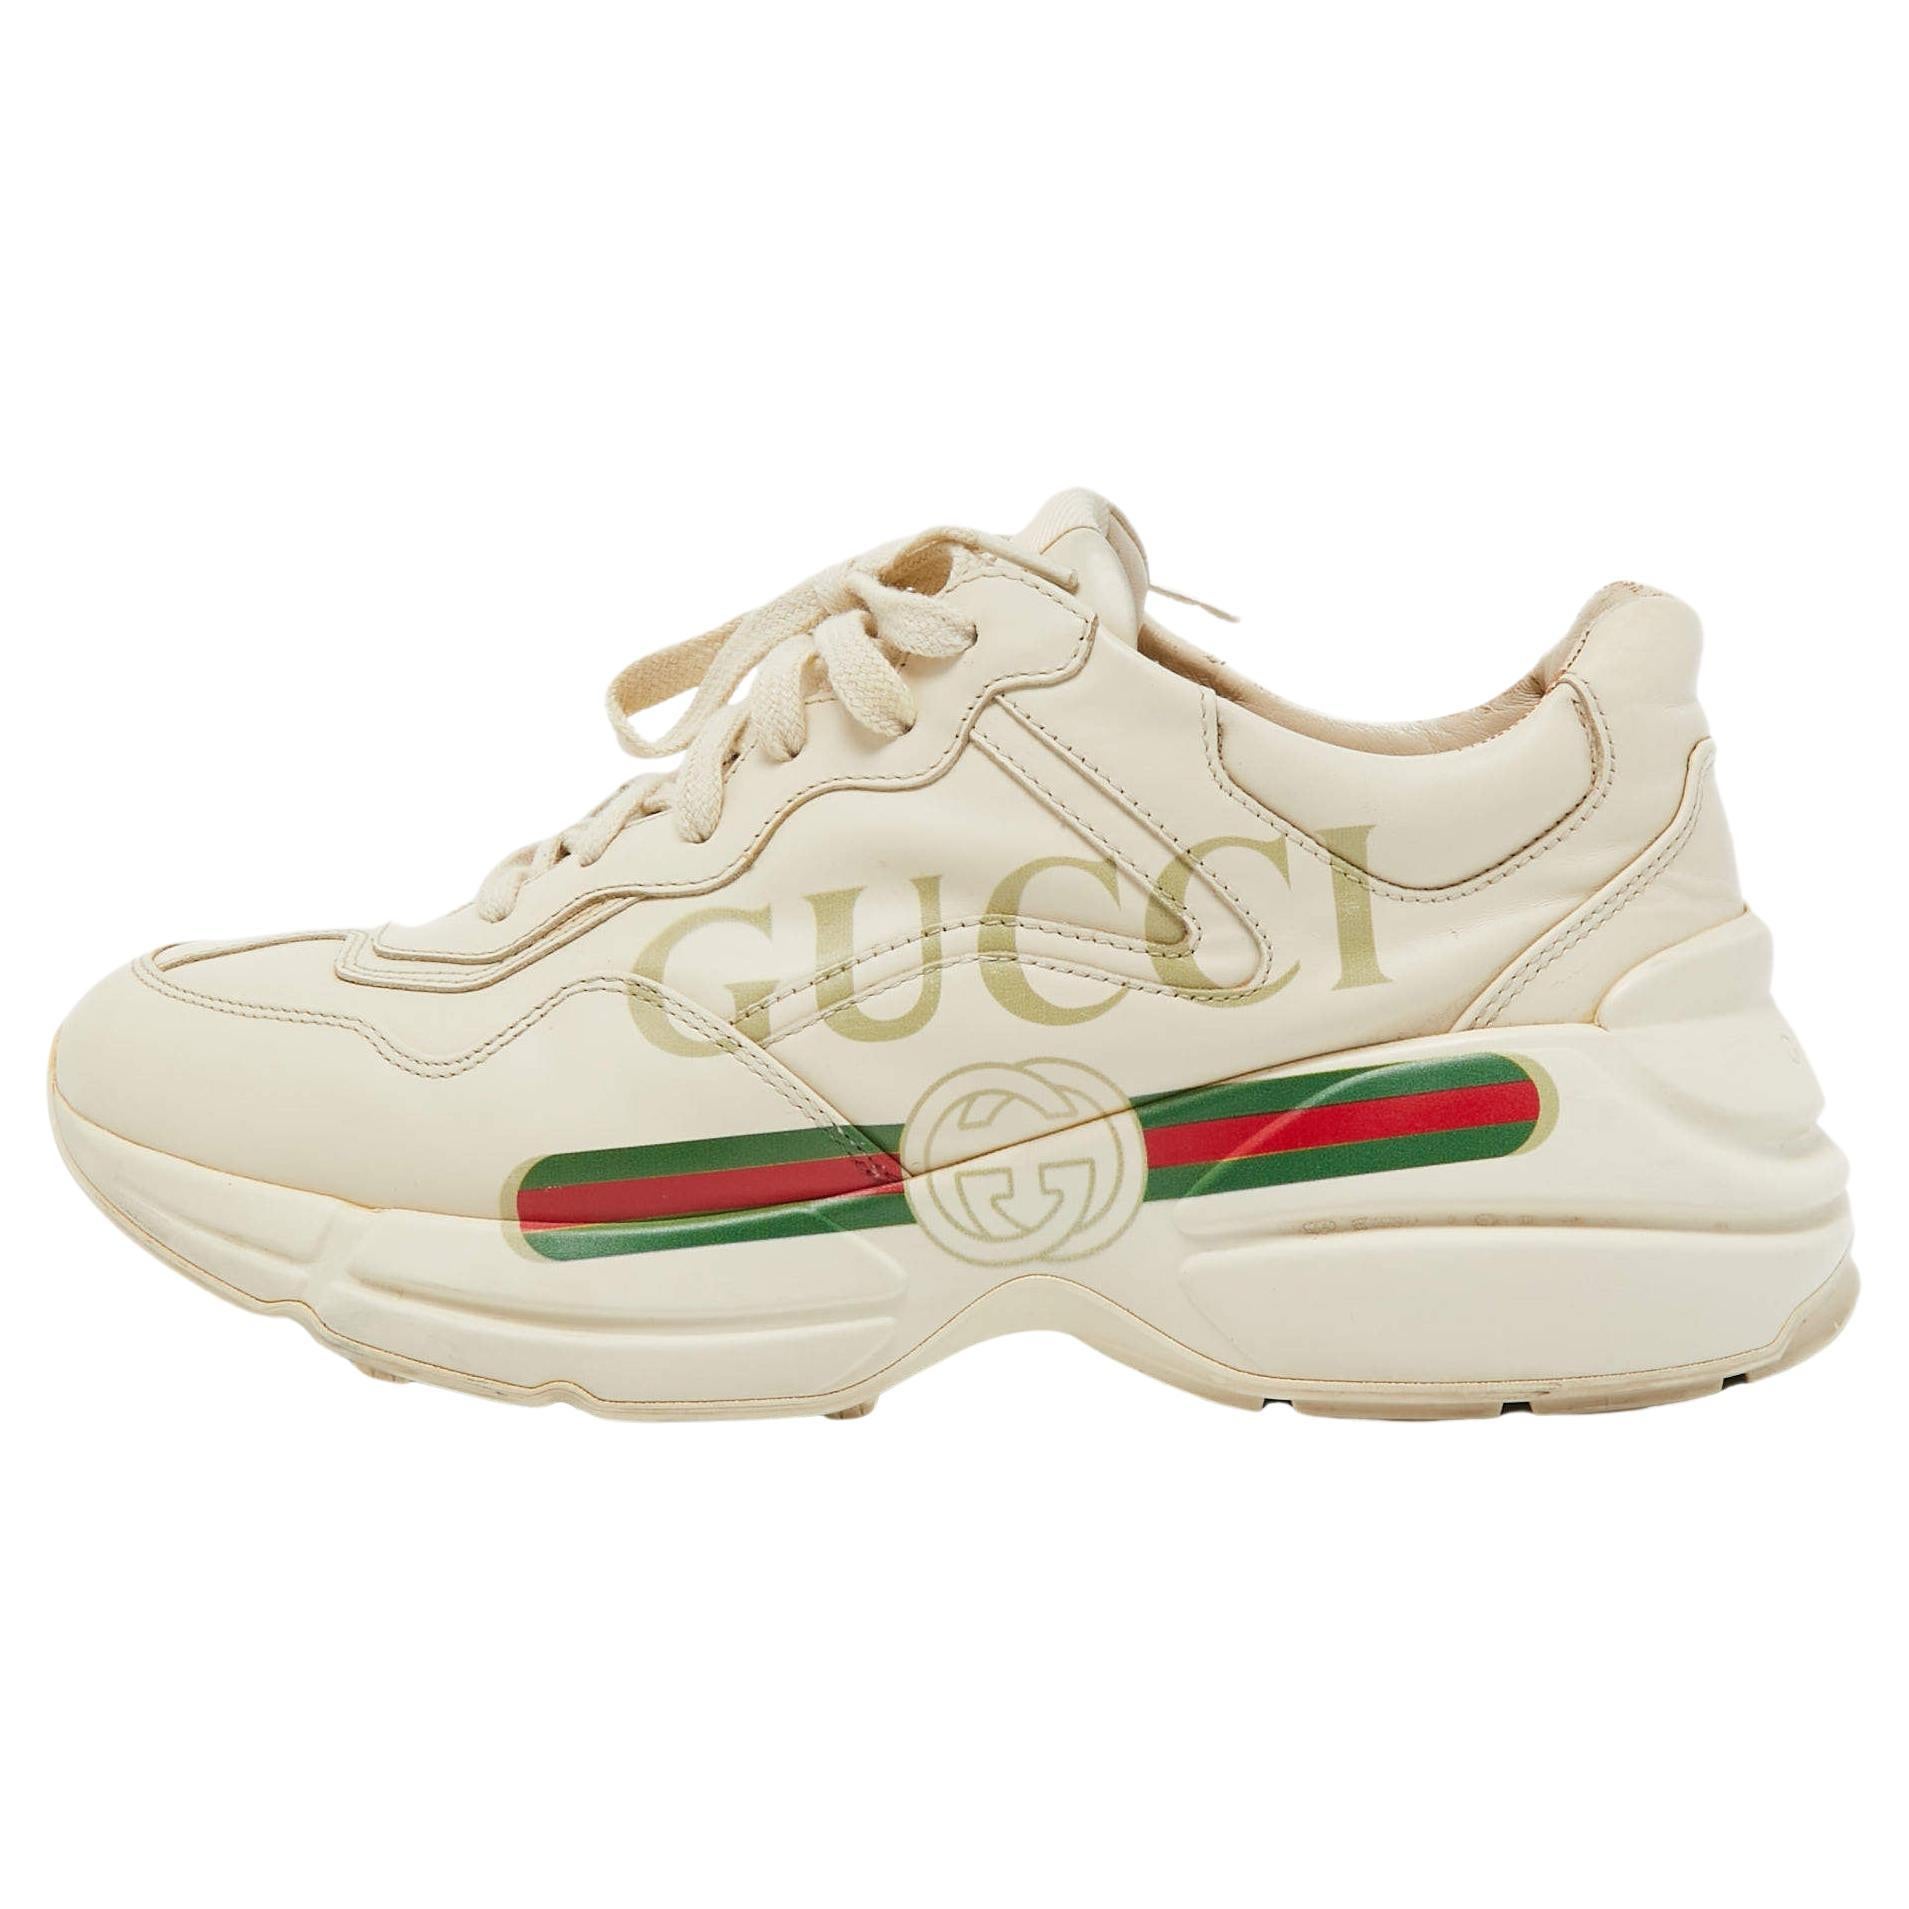 Gucci Cream Leather Rhyton Low Top Sneakers Size 40.5